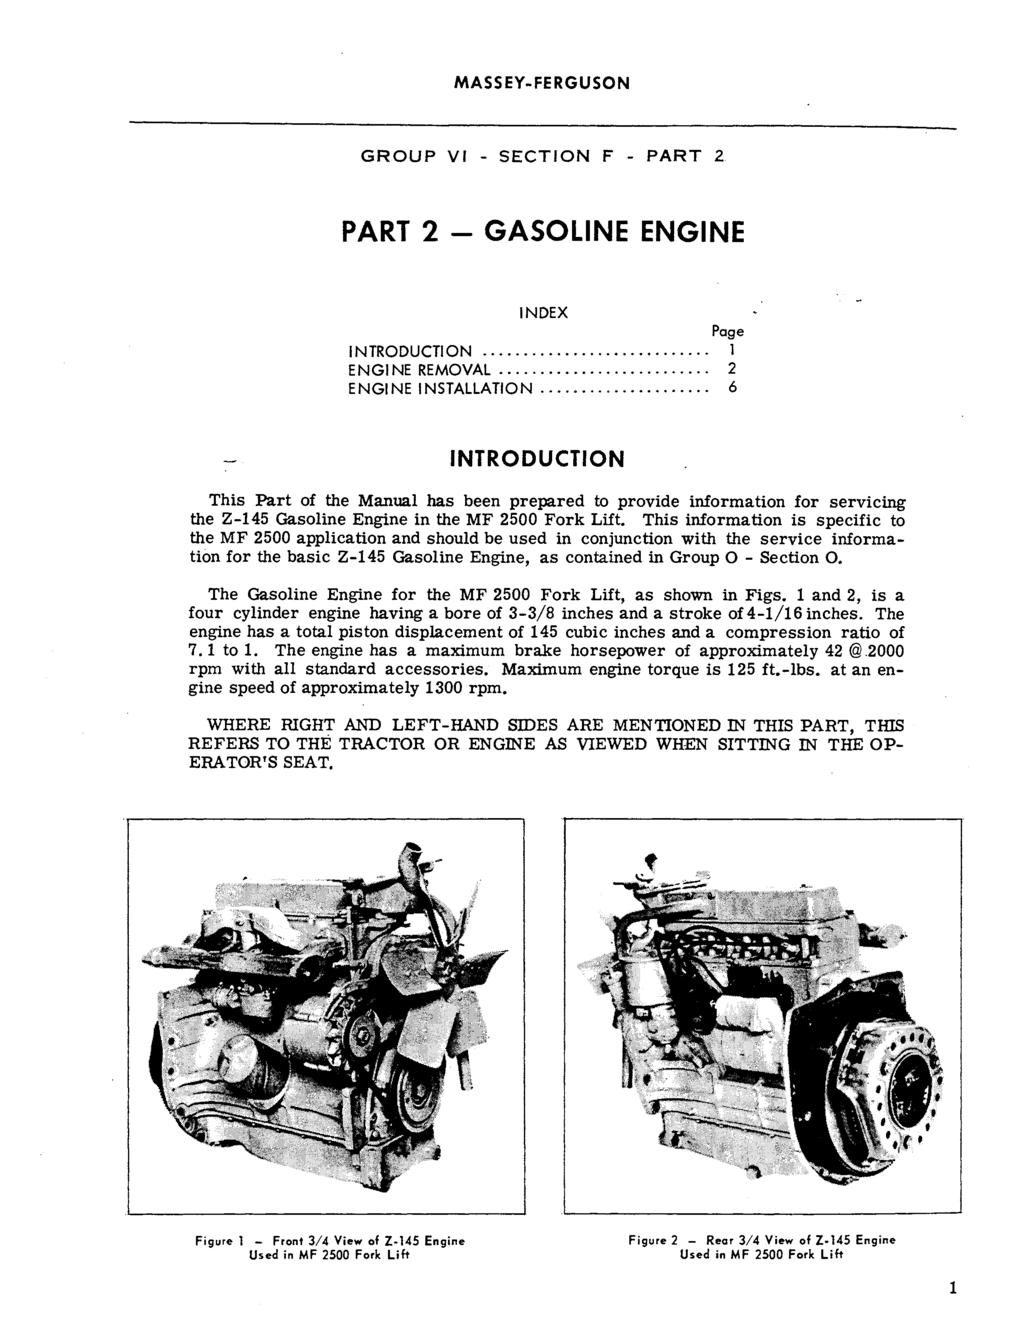 GROUP VI - SECTION F - PART 2. PART 2 - GASOLINE ENGINE INTRODUCTION........................ ENGINE REMOVAL....................... 2 ENGINE INSTALLATION.